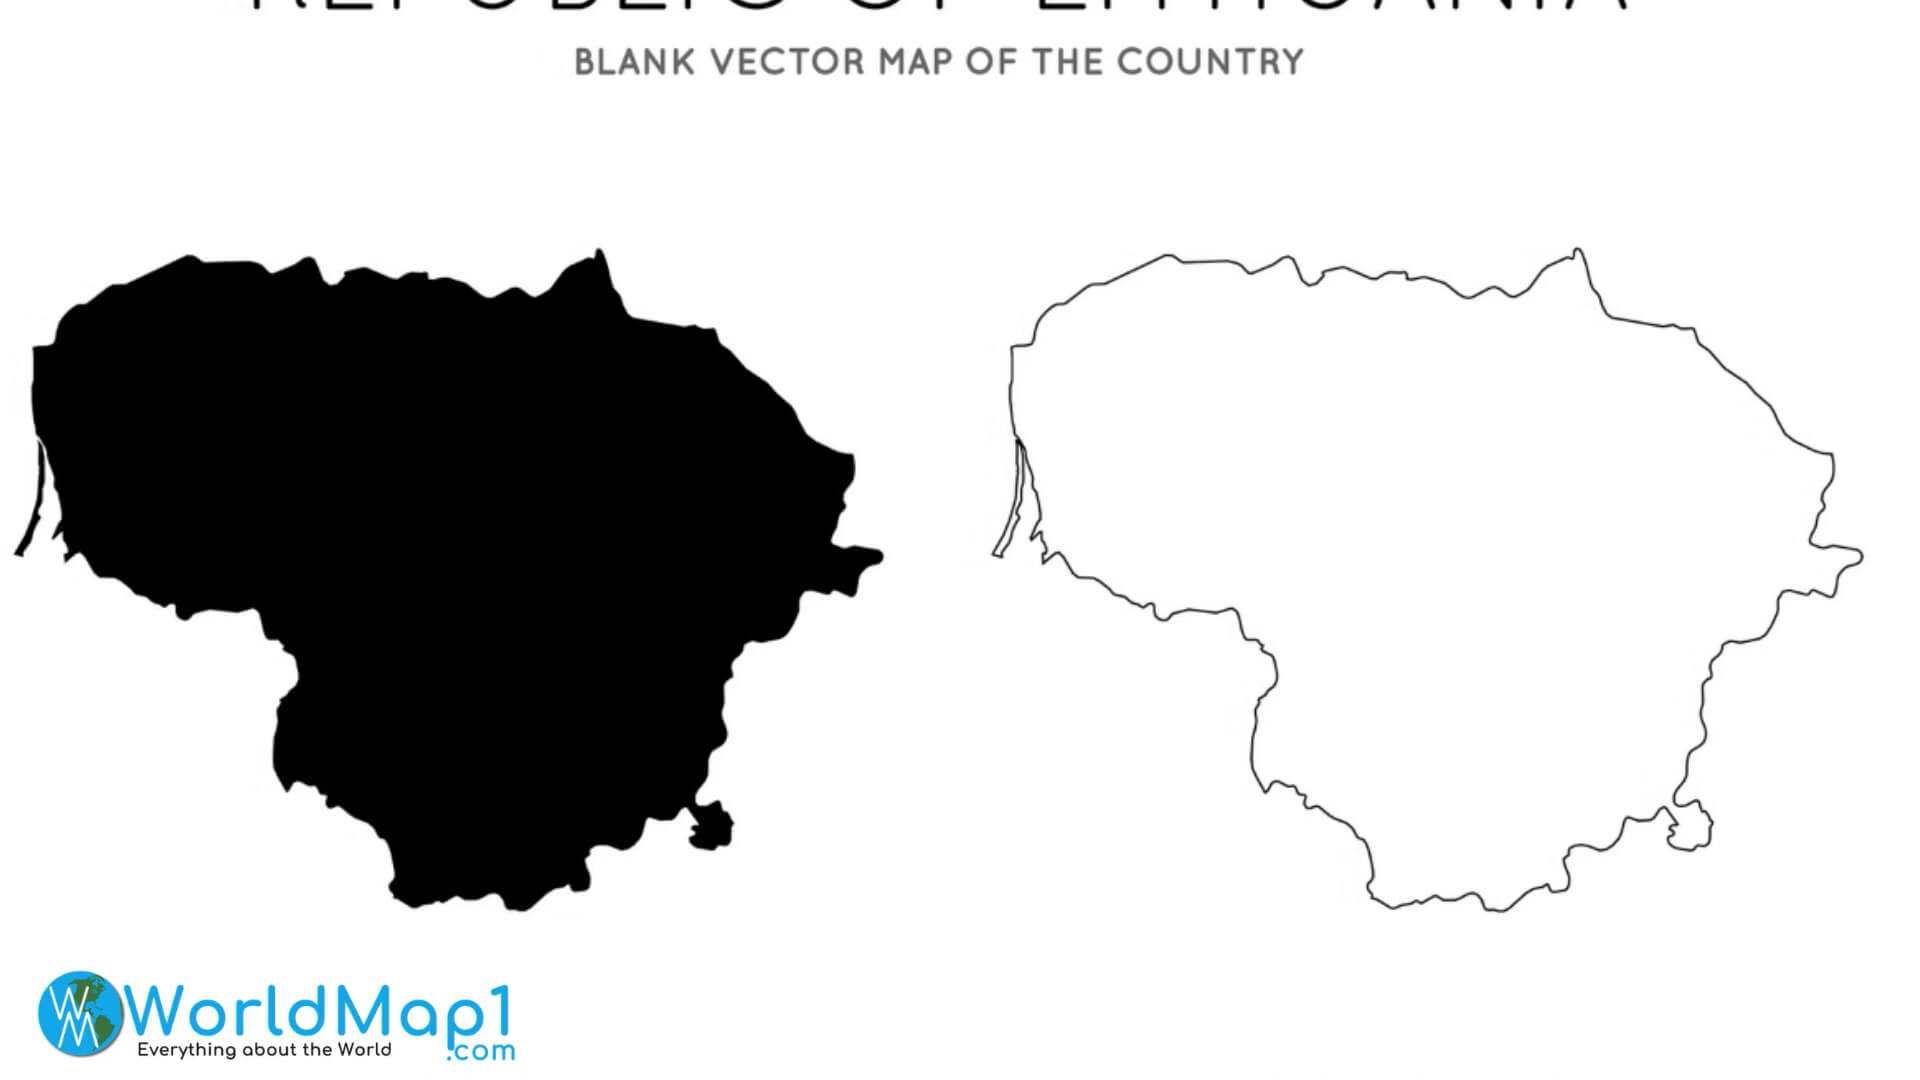 Blank Vector Map of Lithuania